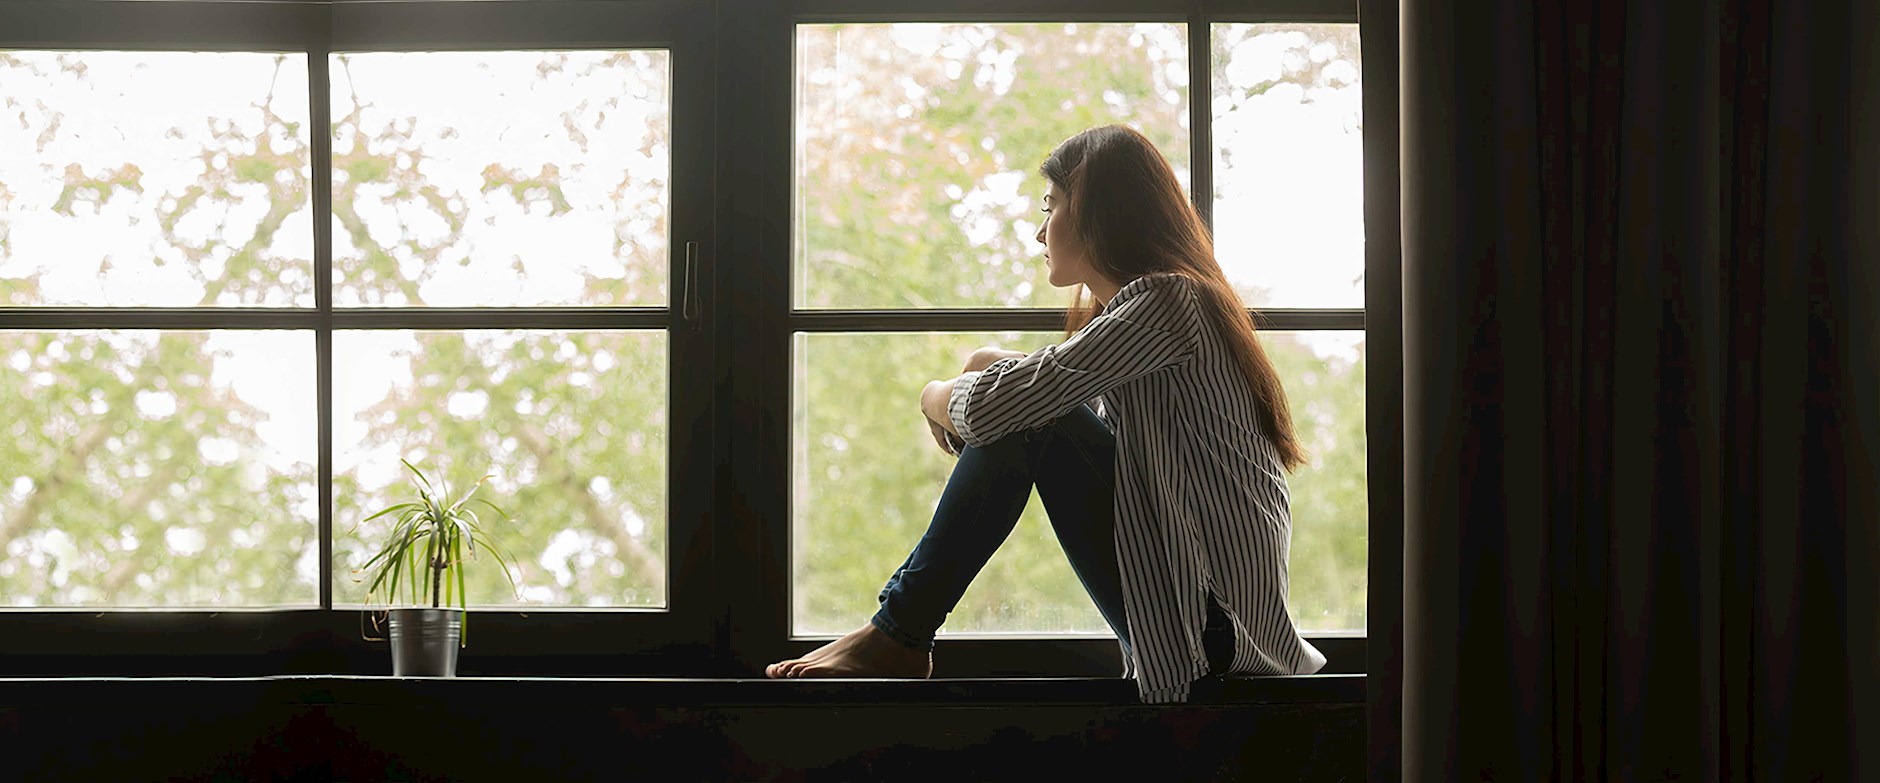 Woman sitting on the window sill looking out